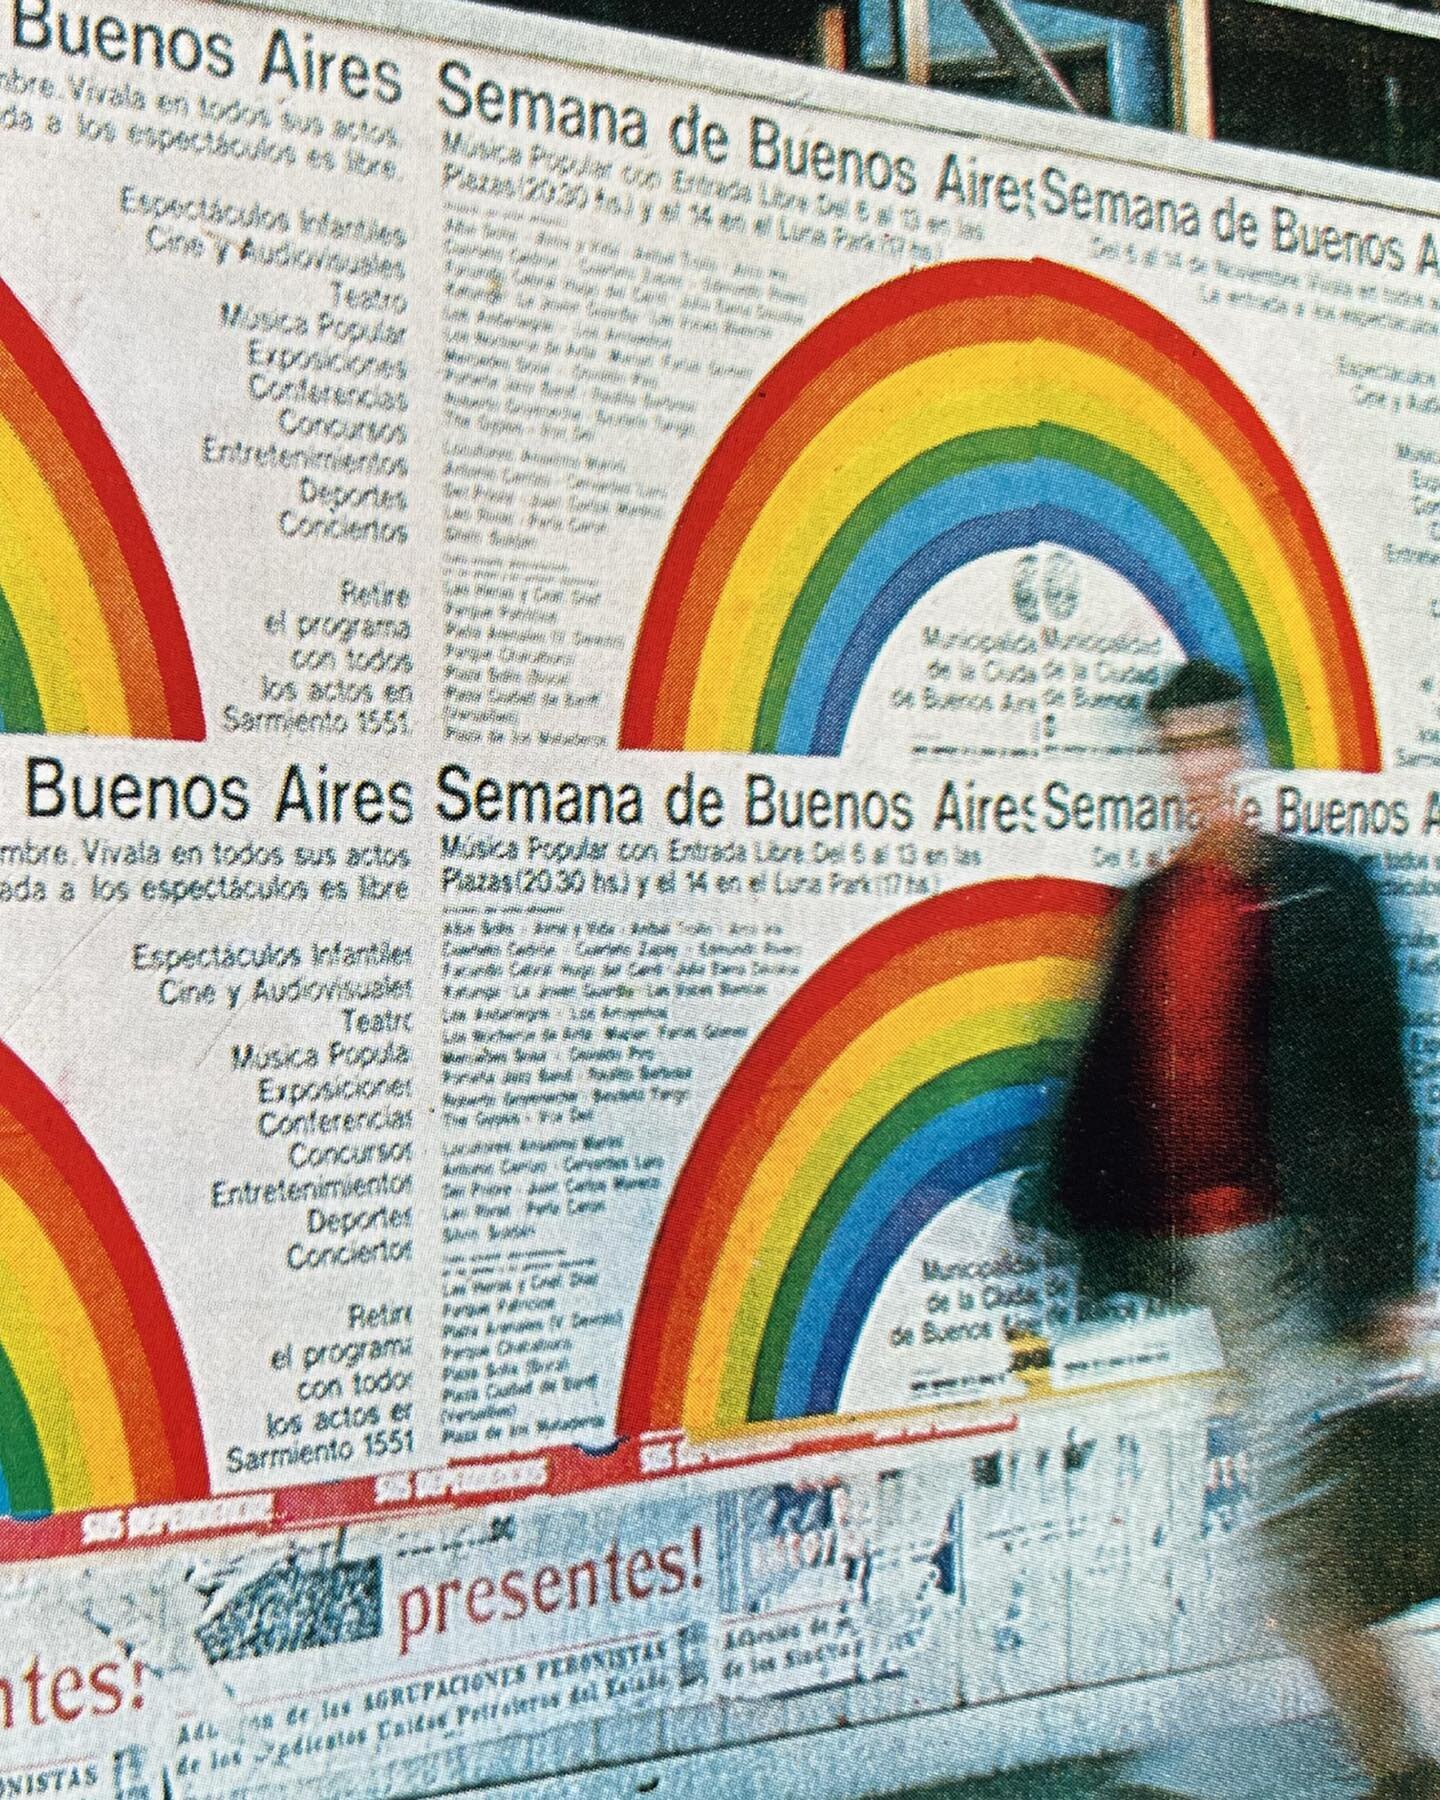 A new take on yesterday&rsquo;s post featuring the iconic 🌈 rainbow for &lsquo;Buenos Aires Week&rsquo; during 1971, as well as how the city&rsquo;s logo and type were supposed to work together. The font choice, originally meant to be Bertold-Grotes